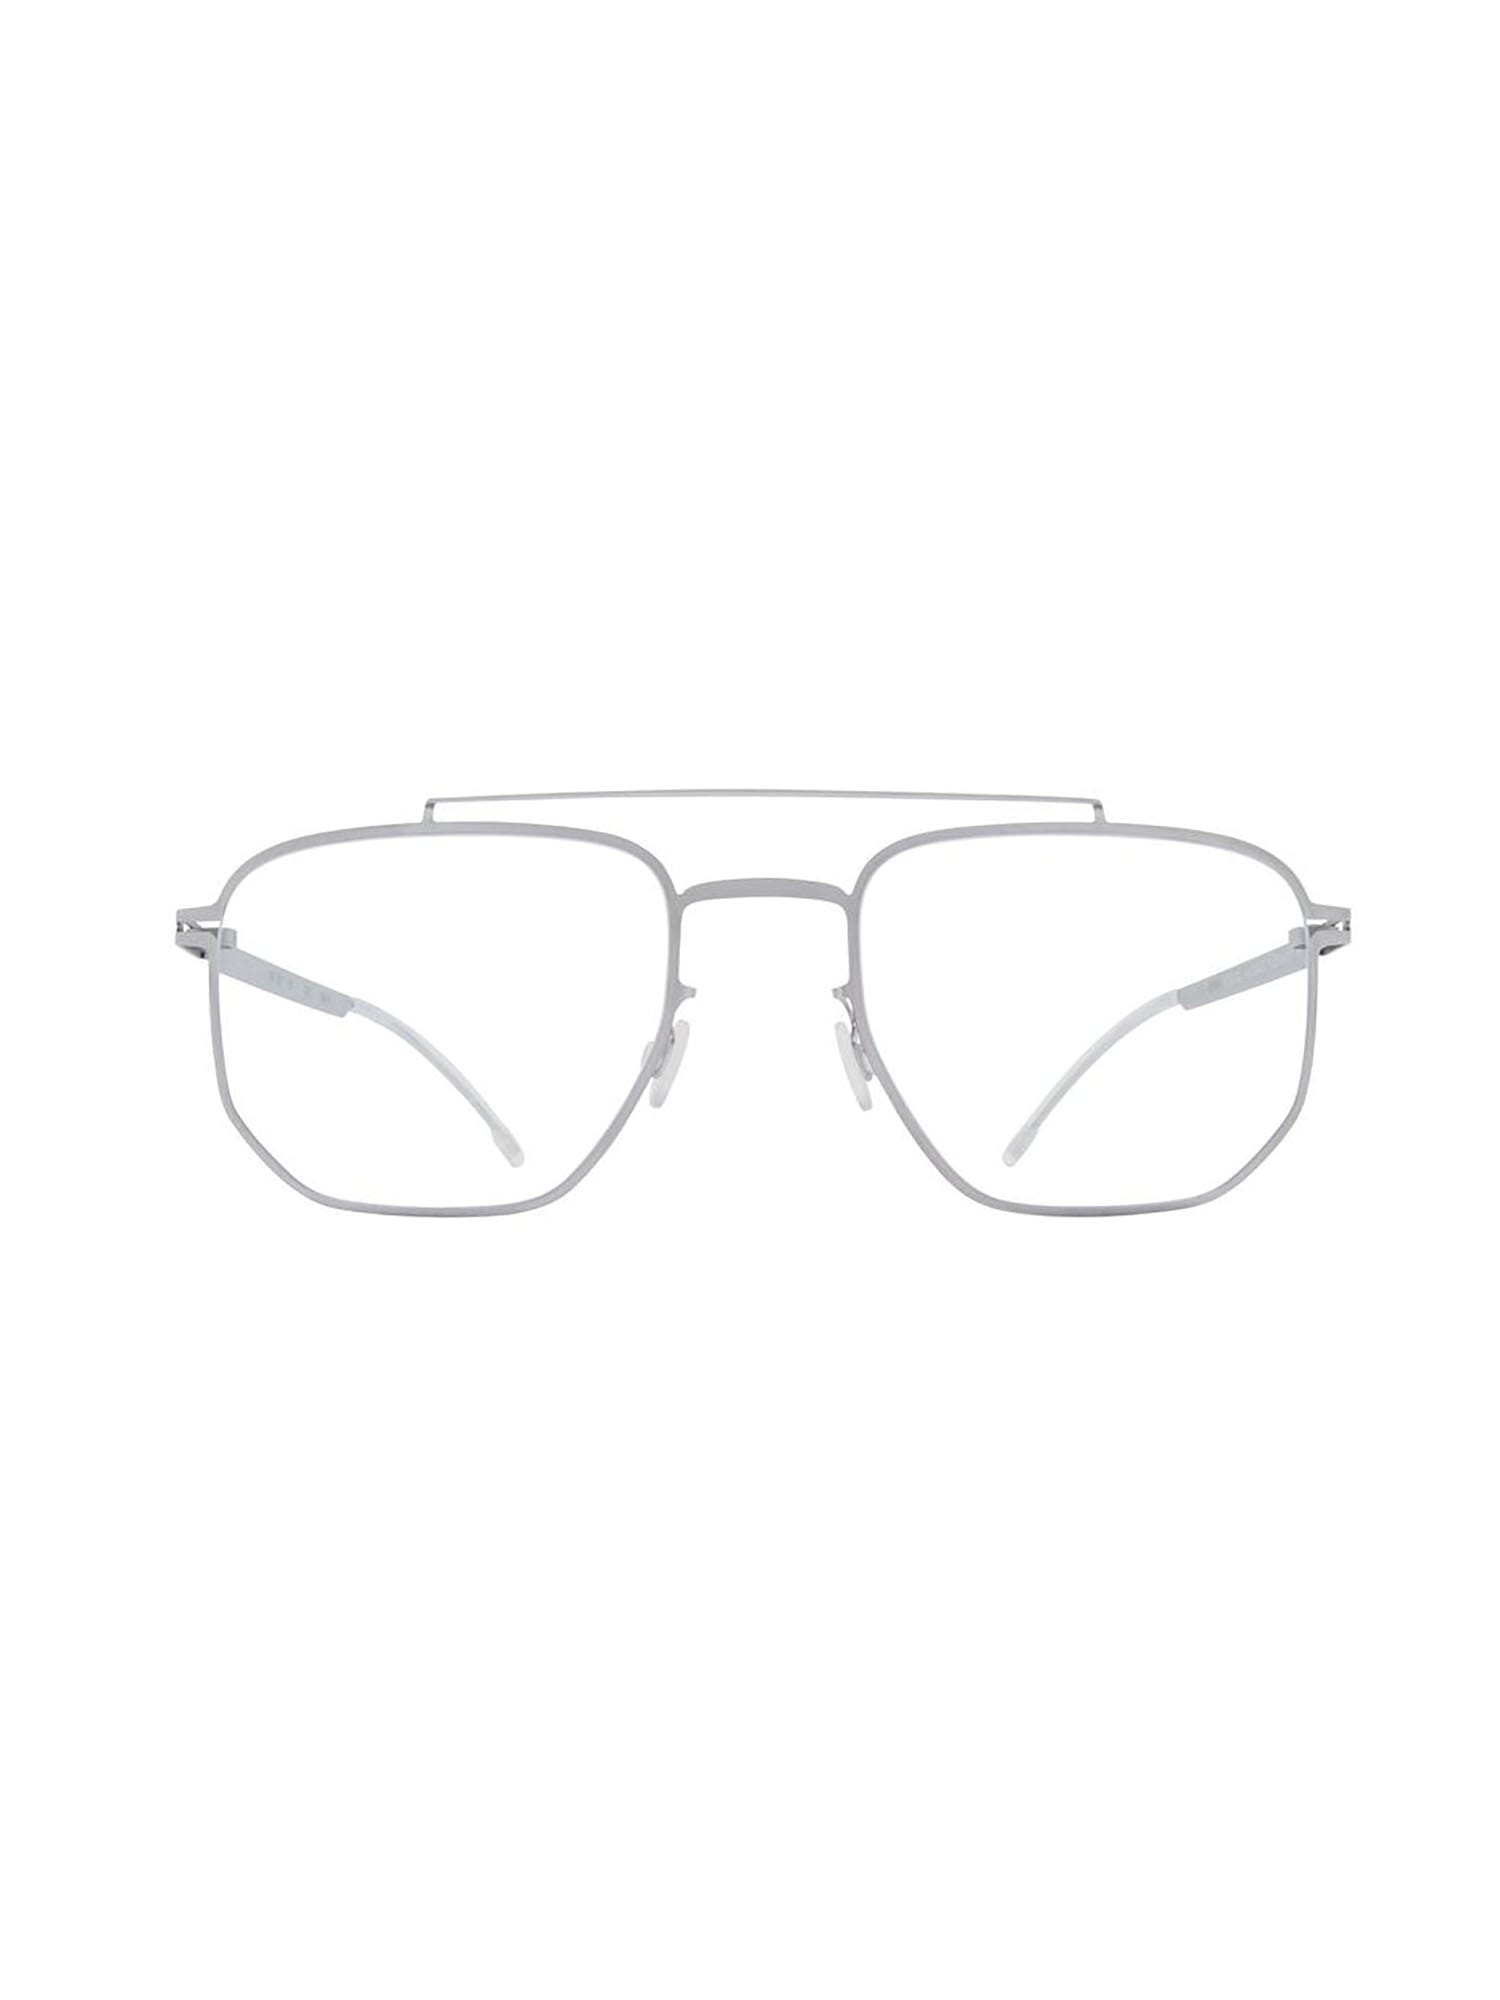 Mykita 193k44h0a In Leica Silver/l. R Cle